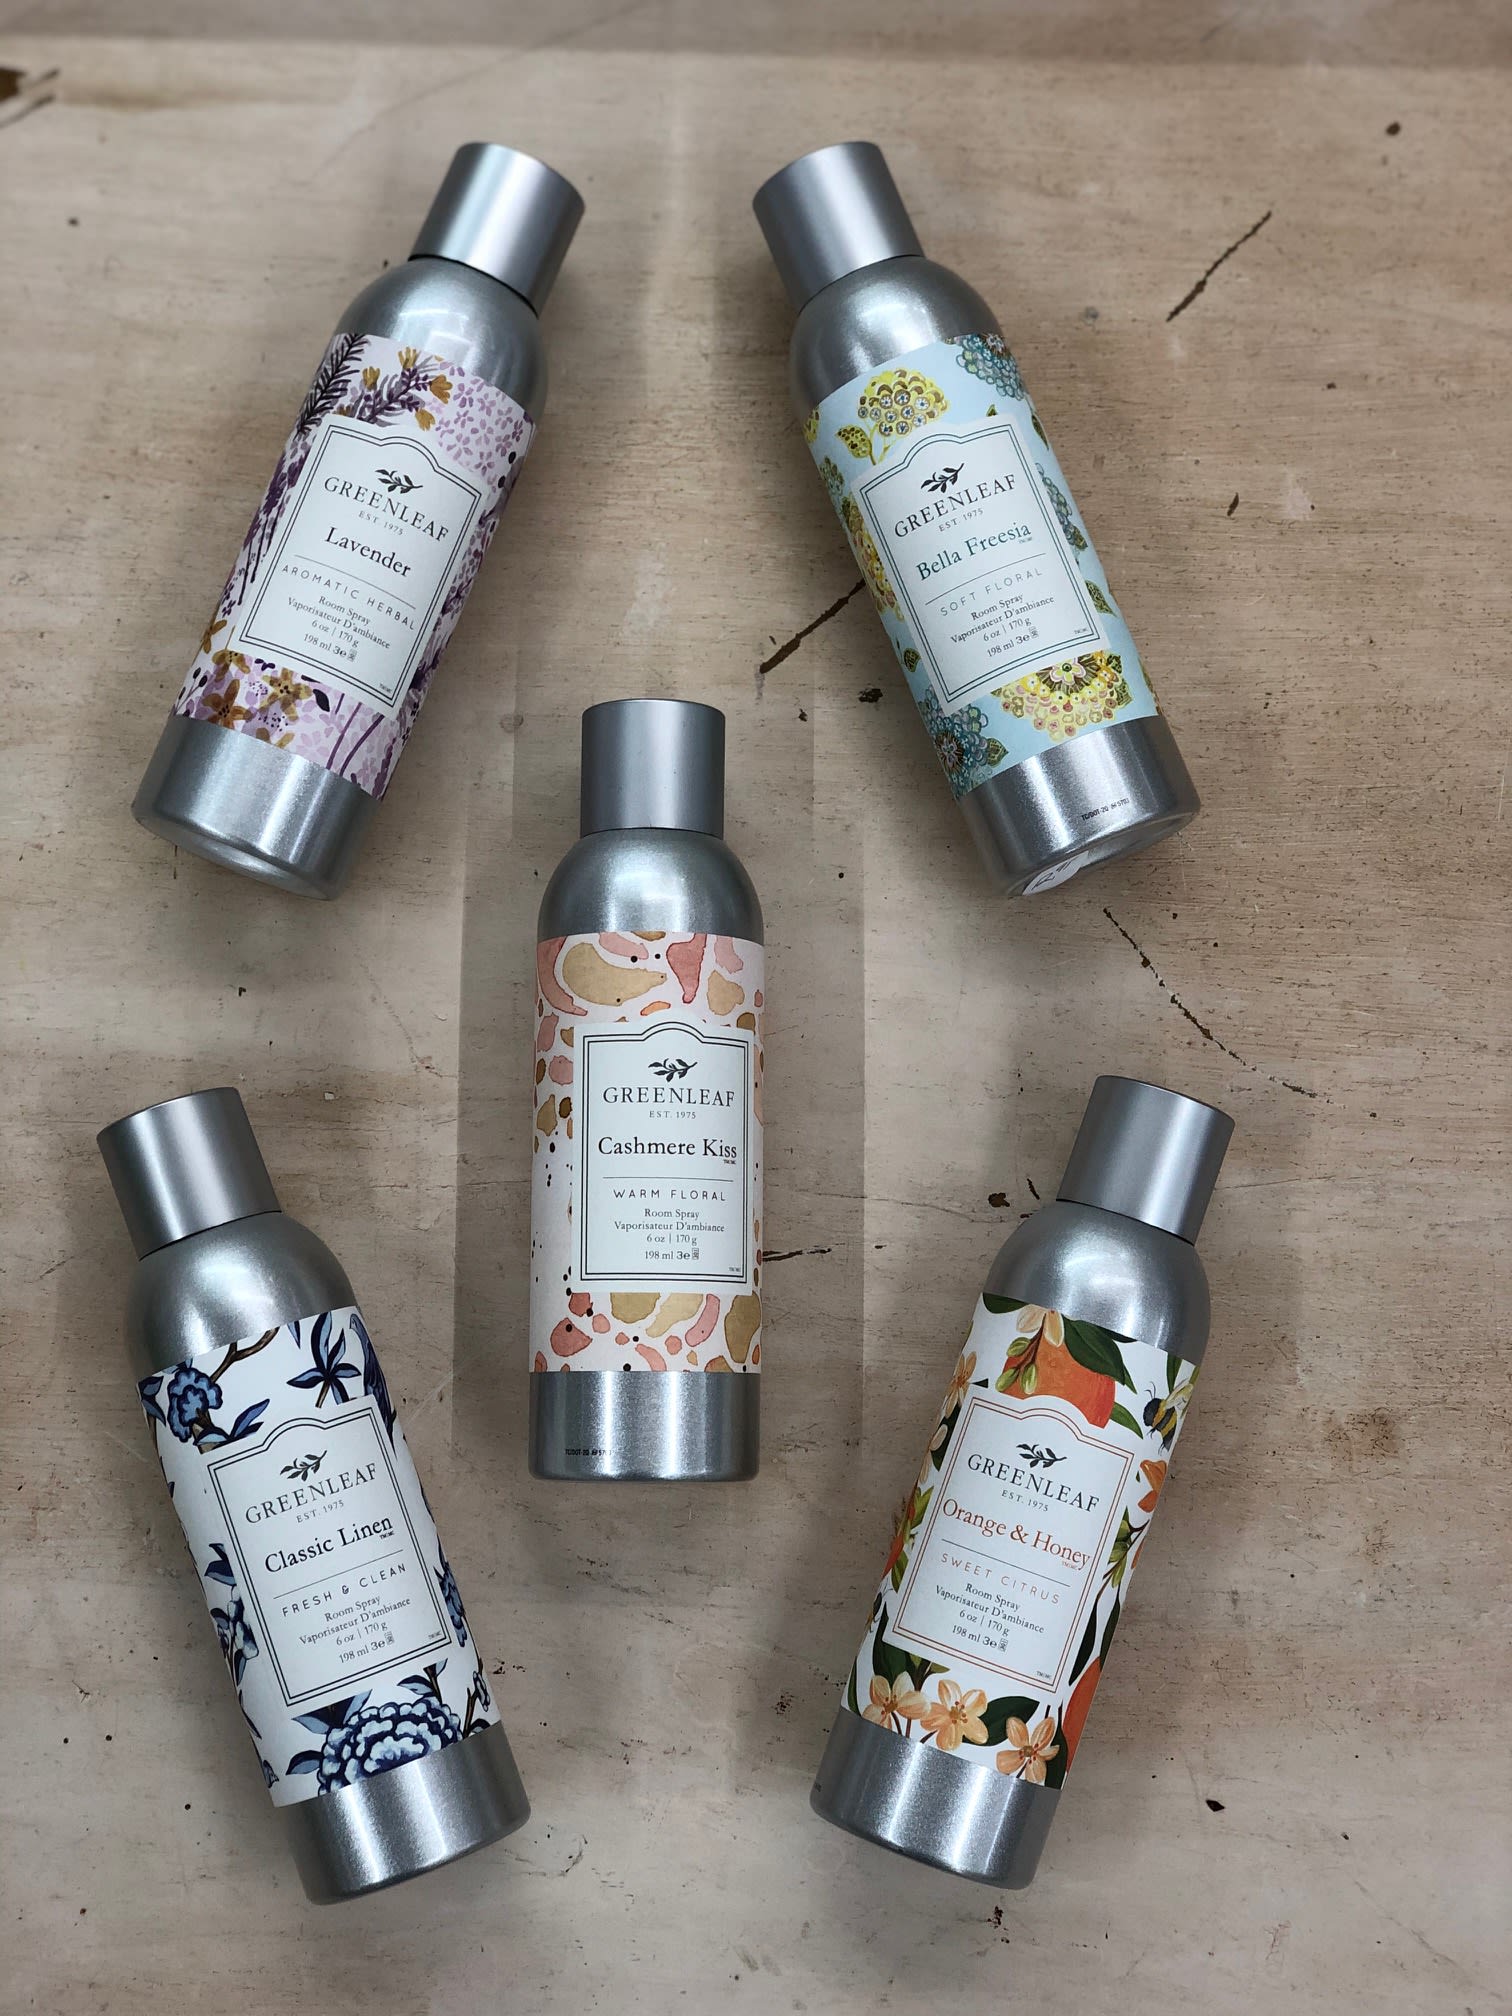 GREENLEAF Room Spray 6oz. - Scents available: Bella Freesia, Cashmere Kiss, Centre Court, Citron Sol, Cucumber &amp; lily, Dahlia &amp; White Musk, Haven, Lavender, Magnolia, Prosecco Plum, Tuscan Vineyard (Call shop for scents availability)  LOCAL DELIVERY ONLY